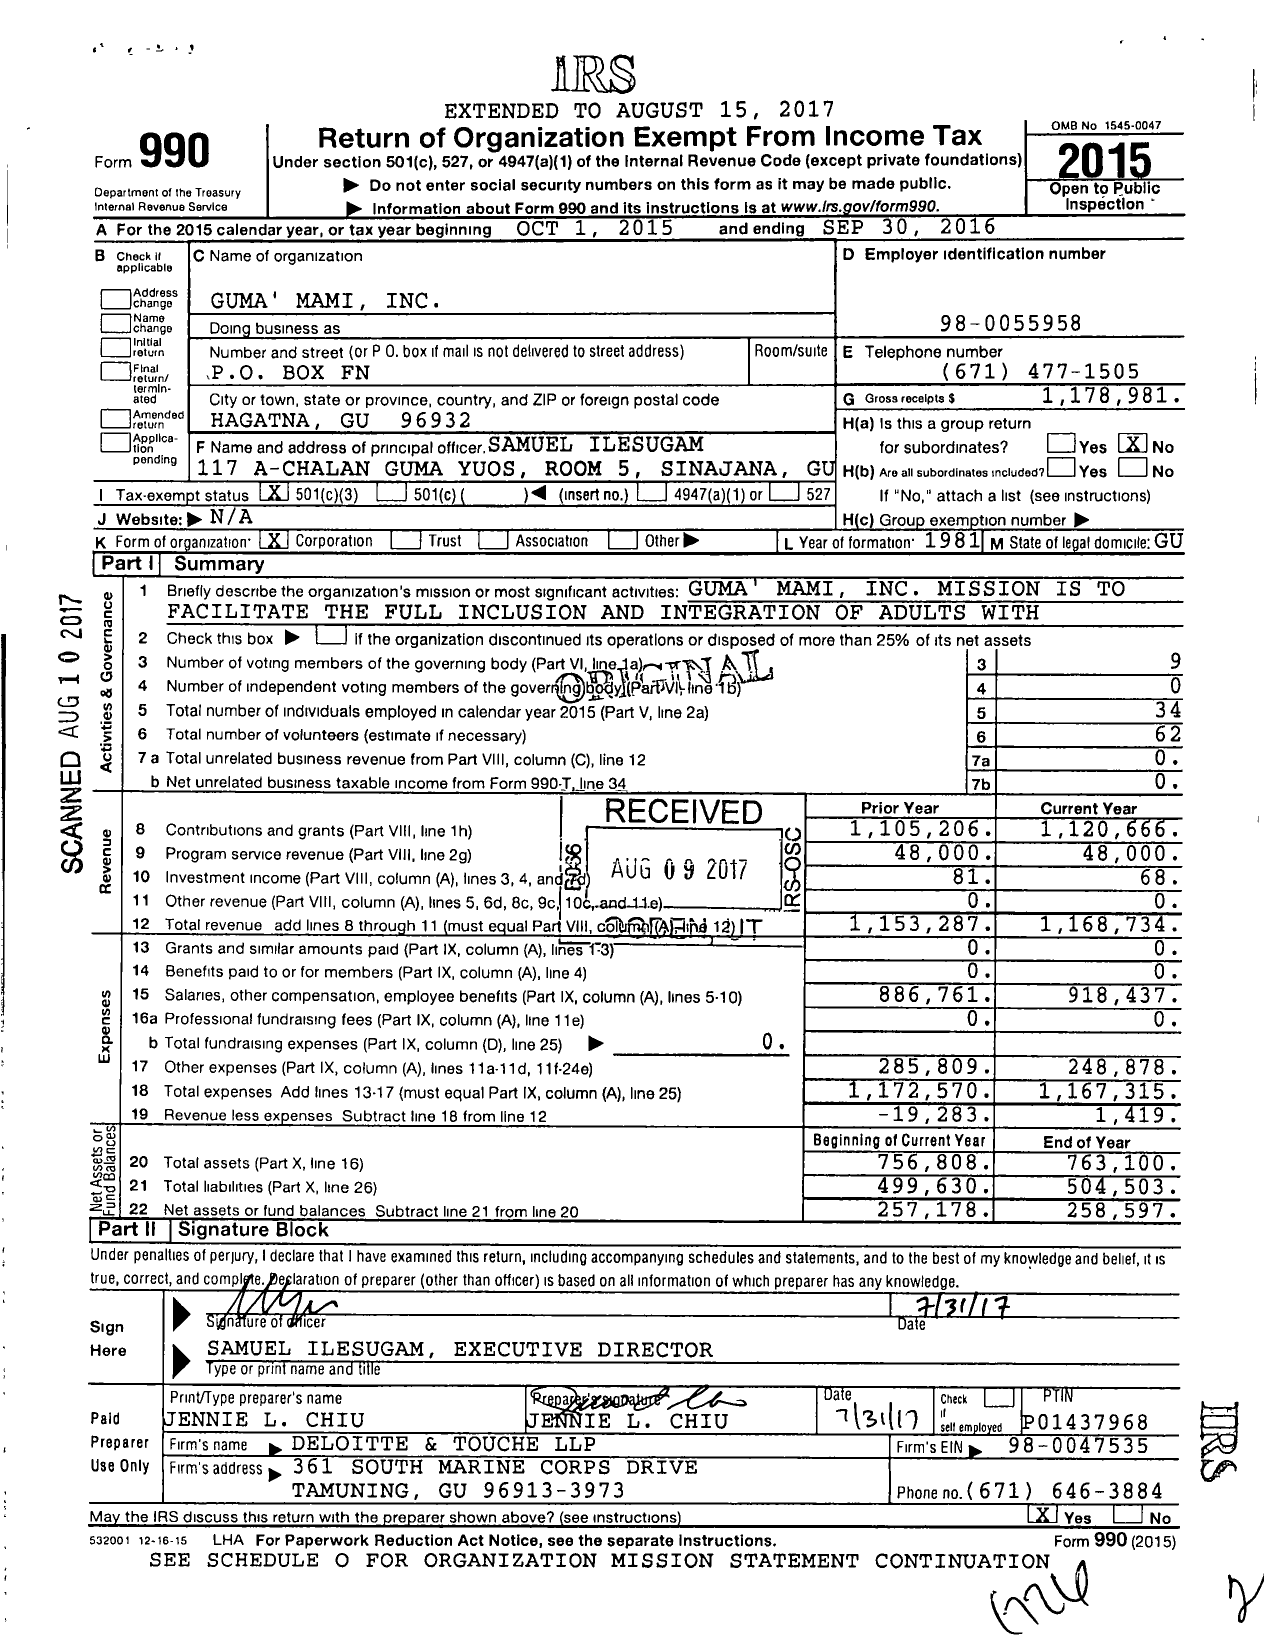 Image of first page of 2015 Form 990 for Guma' Mami